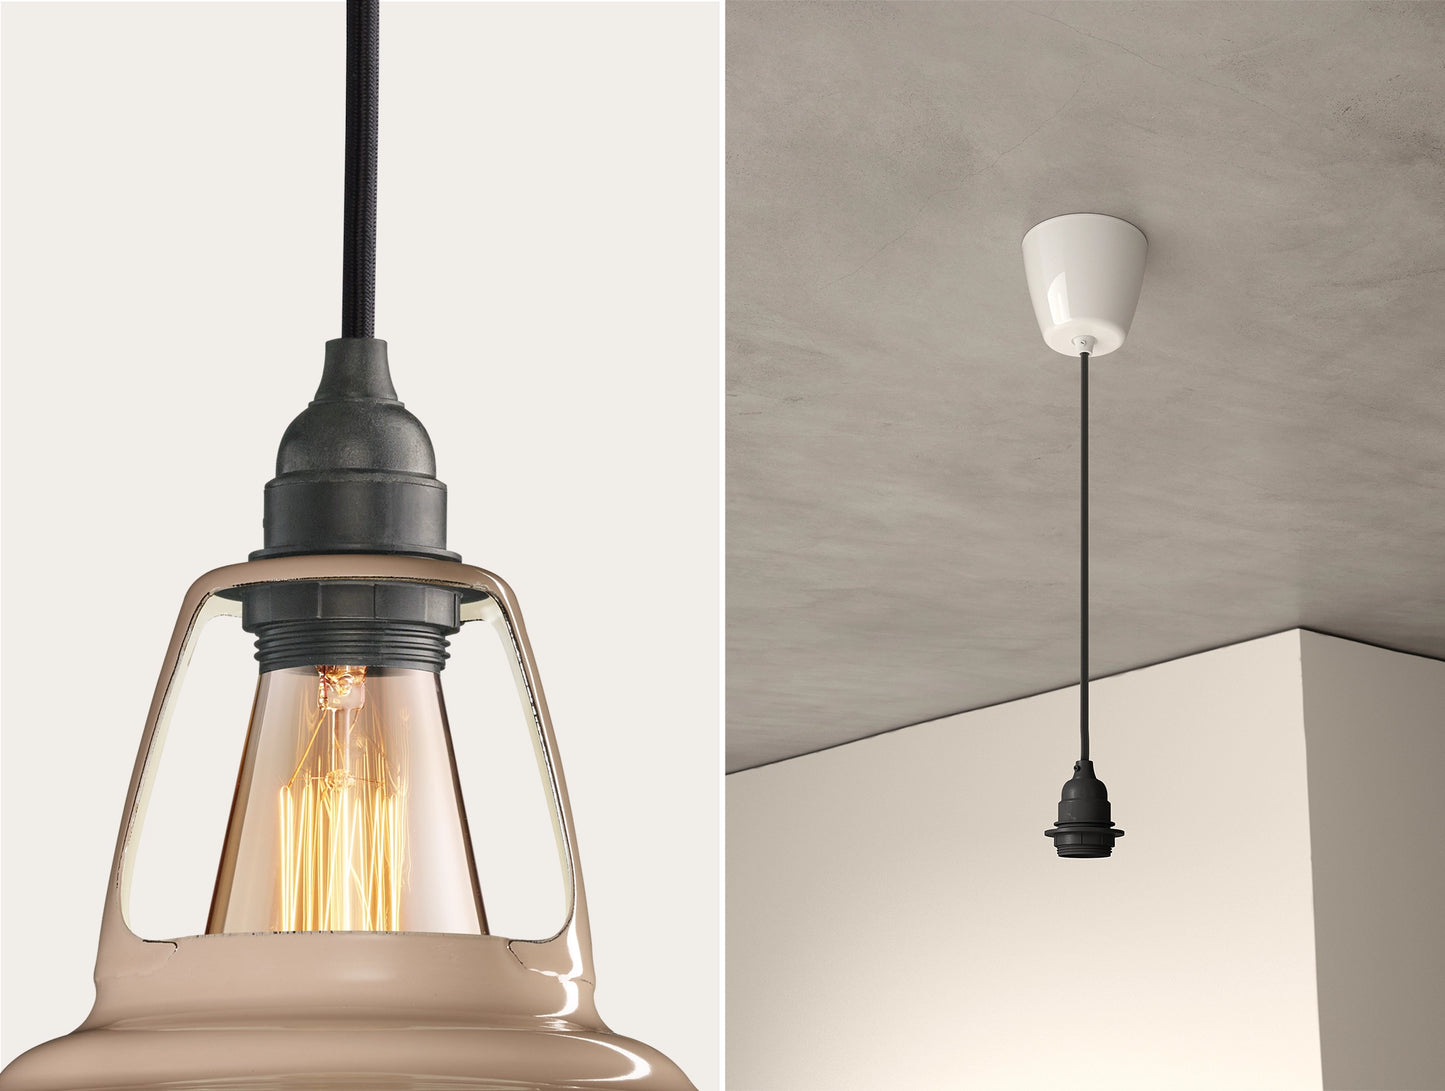 Close up of an E27 Industrial suspension set on a Latte Brown lampshade on the left. On the right, an E27 Industrial pendant set is hanging from the ceiling